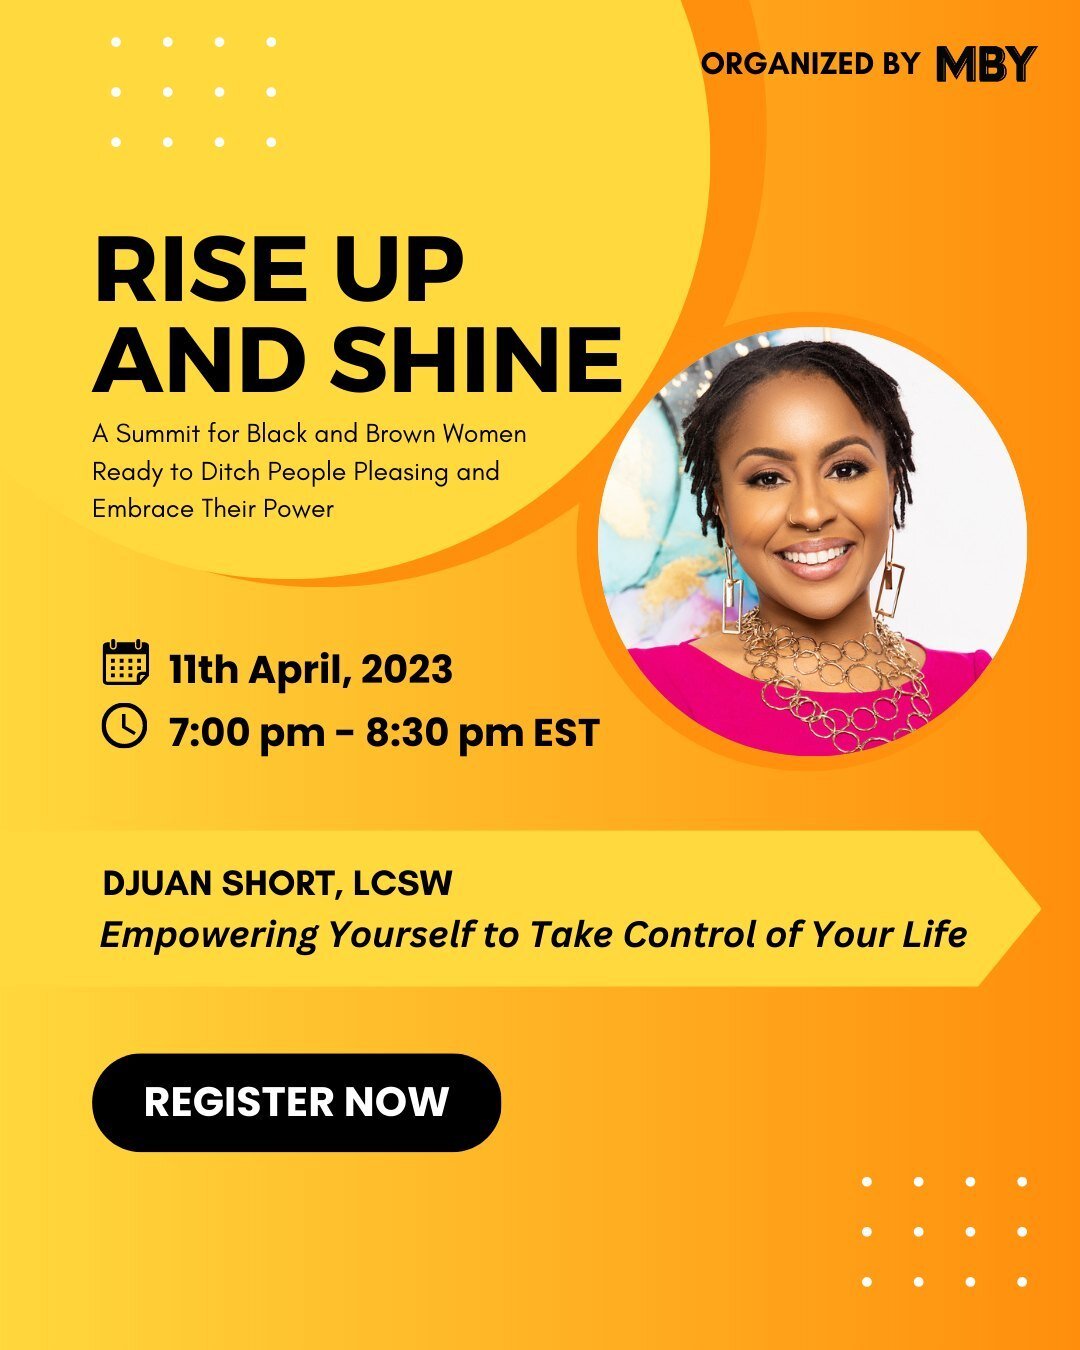 Are you ready to step into your power and take control of your life? 

Our Rise Up and Shine Summit is the perfect place to start! 

This event is specifically designed for black and brown women who want to overcome the unique challenges of living in